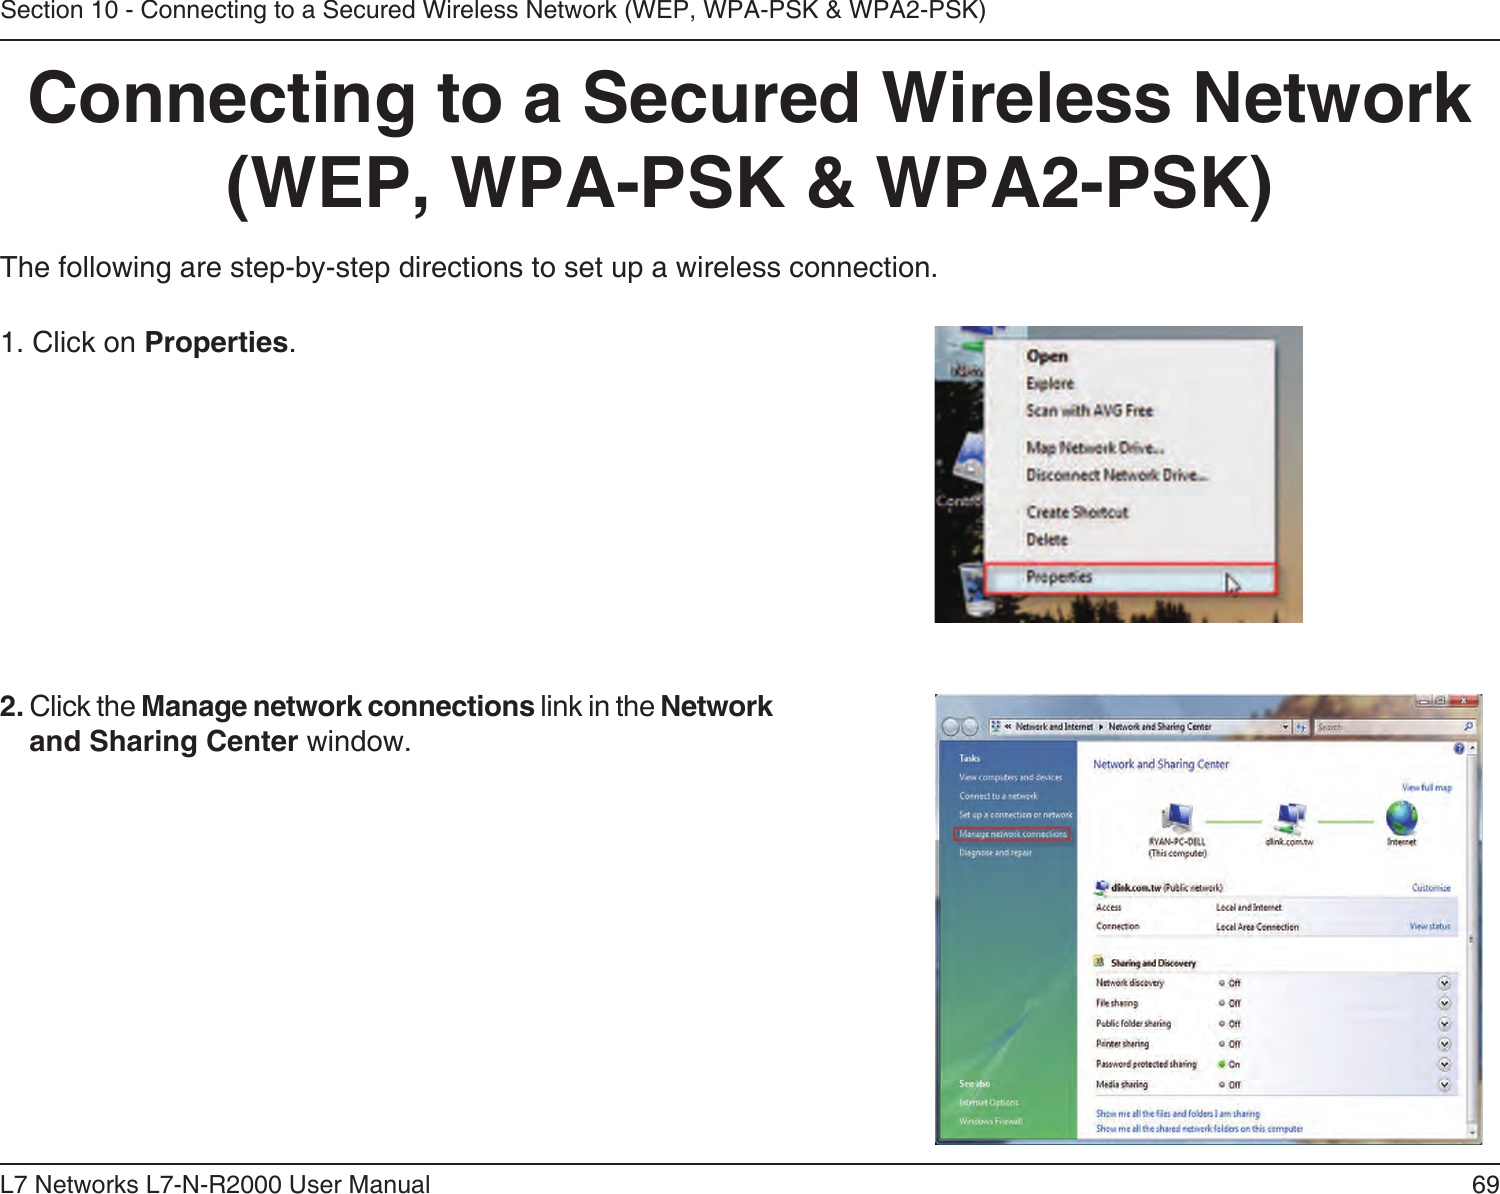 69L7 Networks L7-N-R2000 User ManualSection 10 - Connecting to a Secured Wireless Network (WEP, WPA-PSK &amp; WPA2-PSK)Connecting to a Secured Wireless Network (WEP, WPA-PSK &amp; WPA2-PSK)The following are step-by-step directions to set up a wireless connection.2. Click the Manage network connections link in the Network and Sharing Center window. 1. Click on Properties.     